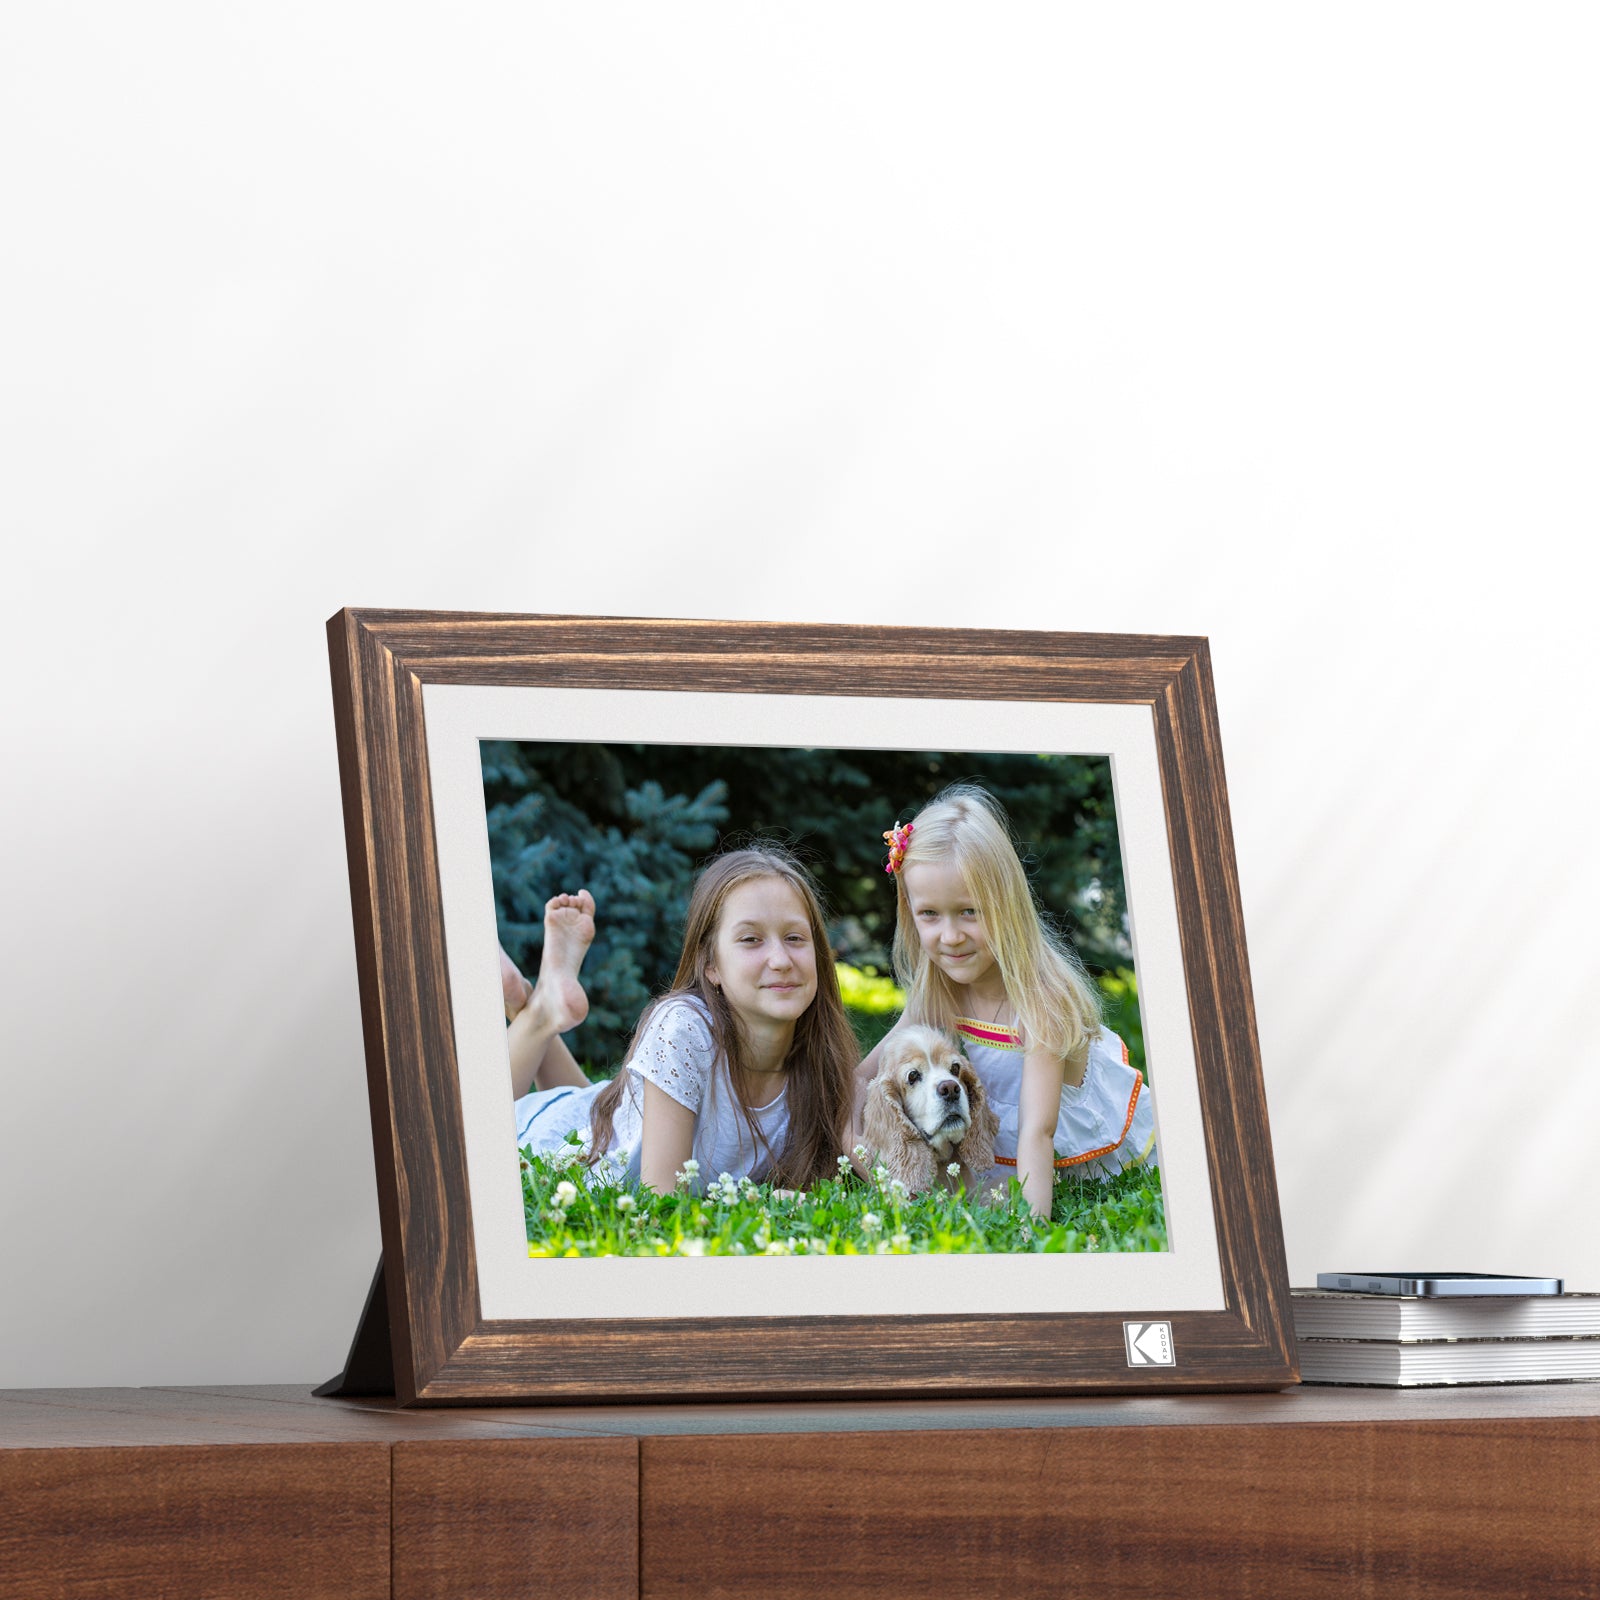 Kodak Rustic Wood WiFi-Enabled Digital Photo Frame HDPF-978, Advanced 9.7” Touchscreen with 2K Resolution, 32GB Internal Memory and Adjustable Stand